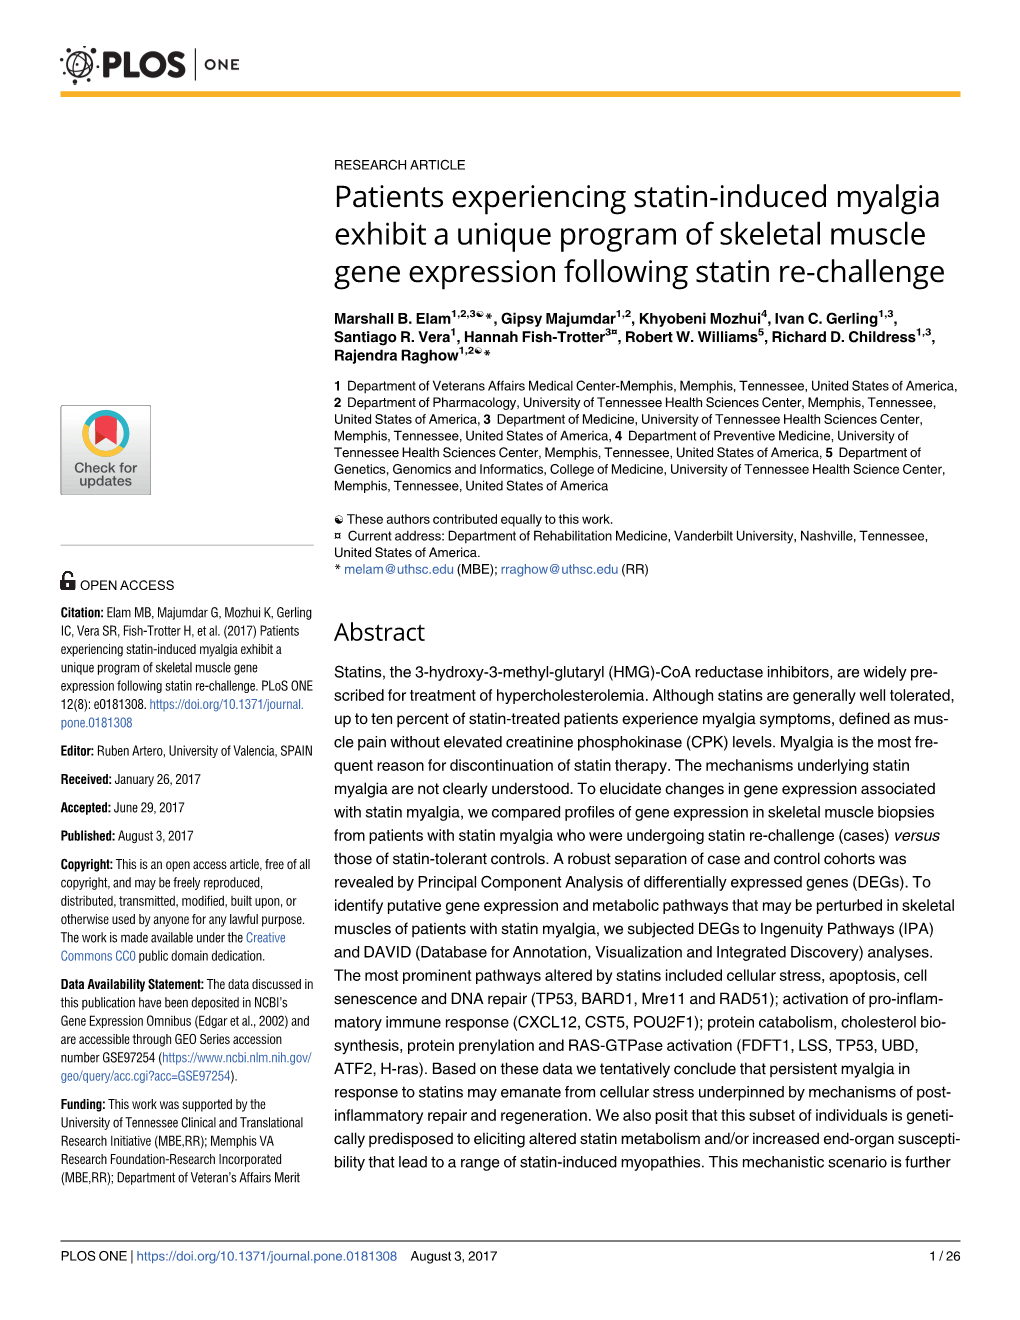 Patients Experiencing Statin-Induced Myalgia Exhibit a Unique Program of Skeletal Muscle Gene Expression Following Statin Re-Challenge